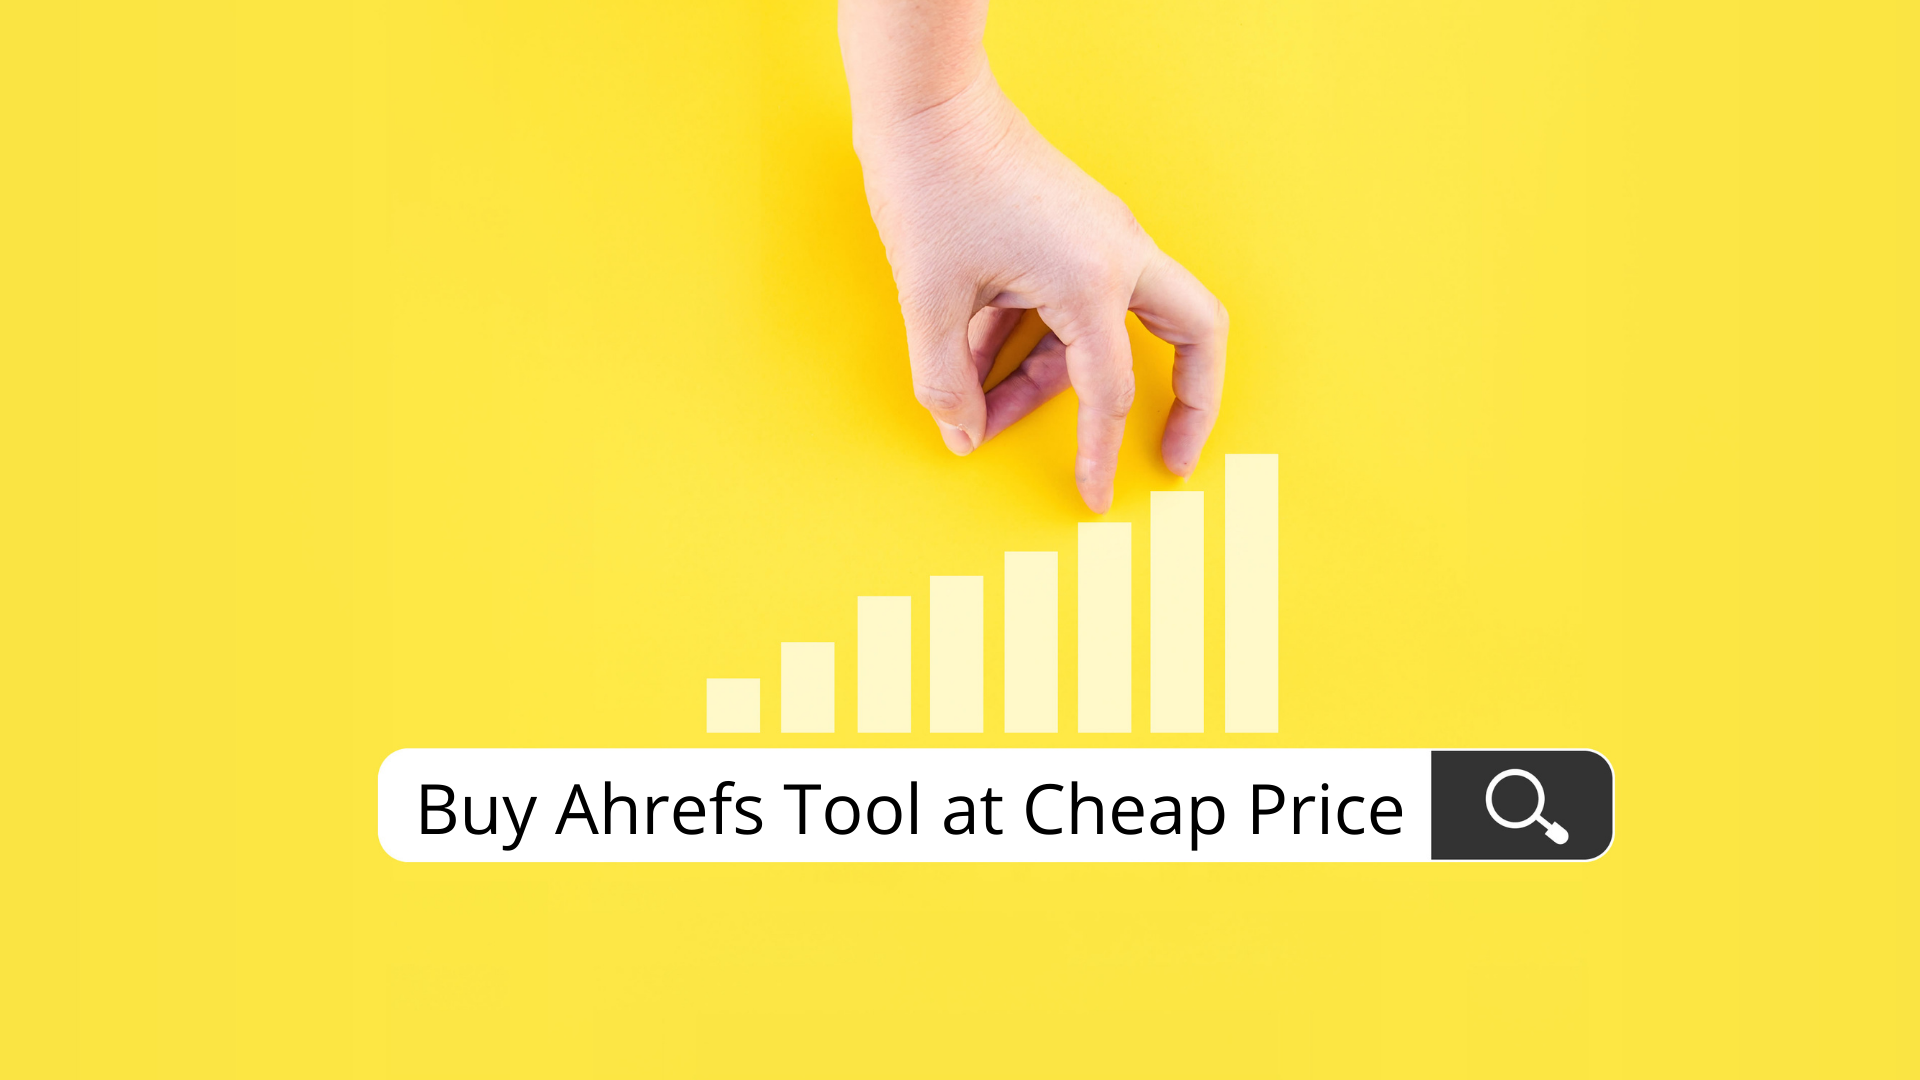 23 Group Buy Sites to Buy Ahrefs Tool at Cheap Price in India